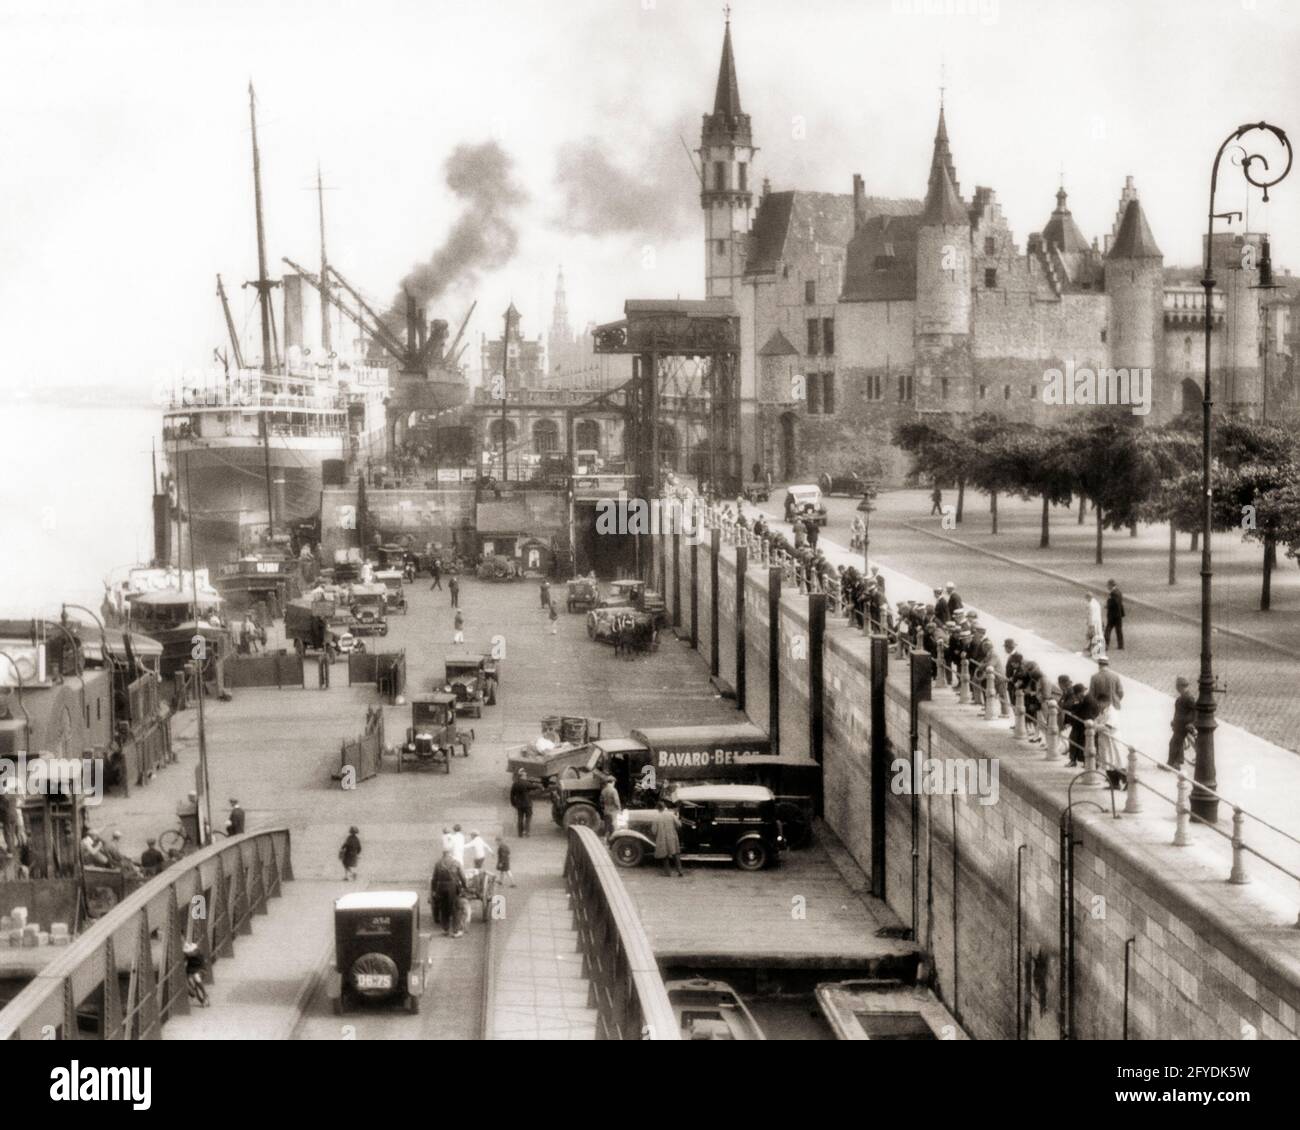 1920s 1928 SHIPPING ACTIVITY ON RIVER SCHELDT WATERFRONT & THE HET STEEN A MEDIEVAL FORTRESS IN THE OLD CITY OF ANTWERP BELGIUM - r4476 HAR001 HARS TRANSPORT COPY SPACE LADIES PERSONS AUTOMOBILE MALES BUILDINGS PEDESTRIANS TRANSPORTATION CARGO EUROPE B&W BELGIUM ACTIVITY PEDESTRIAN STRUCTURE HIGH ANGLE EUROPEAN PROPERTY AUTOS EXCITEMENT EXTERIOR REAL ESTATE AUTOMOBILES VEHICLES EDIFICE FORTRESS FREIGHTER TRADE COMMERCE SHIPPING WATERFRONT 1928 BLACK AND WHITE HAR001 OLD FASHIONED OLDEST VESSEL Stock Photo